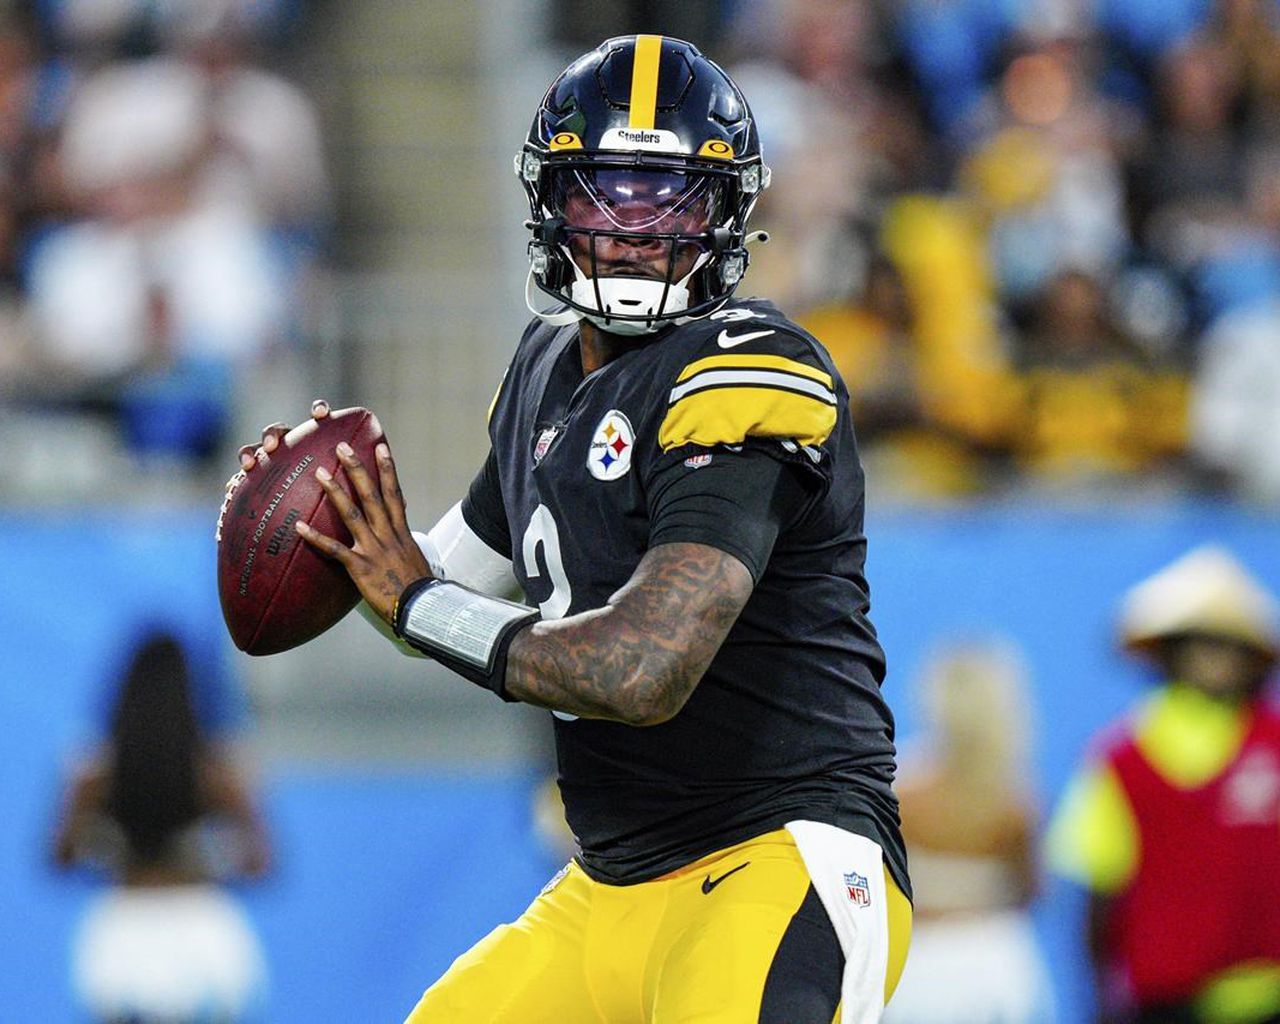 Steelers Qb Dwayne Haskins Killed In Auto Accident The Star